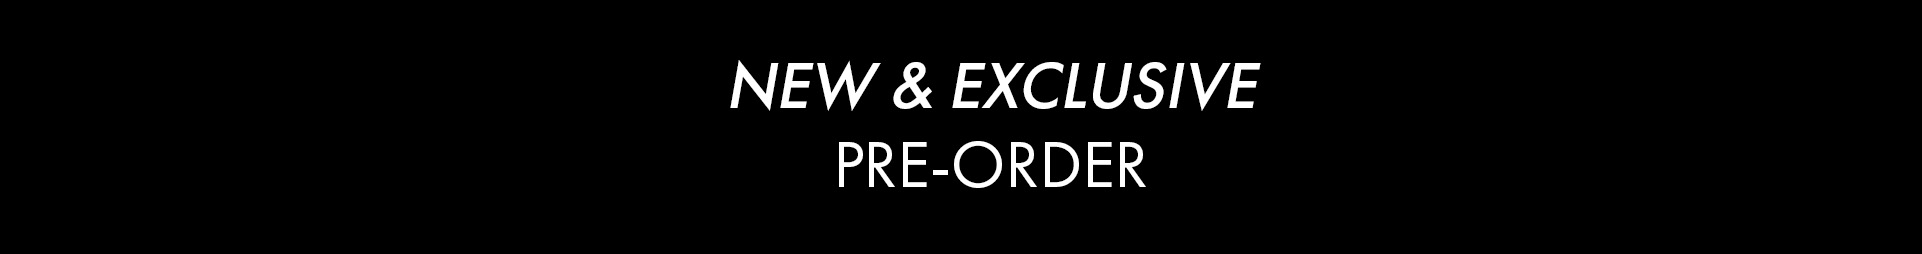 New & Exclusive Pre Order